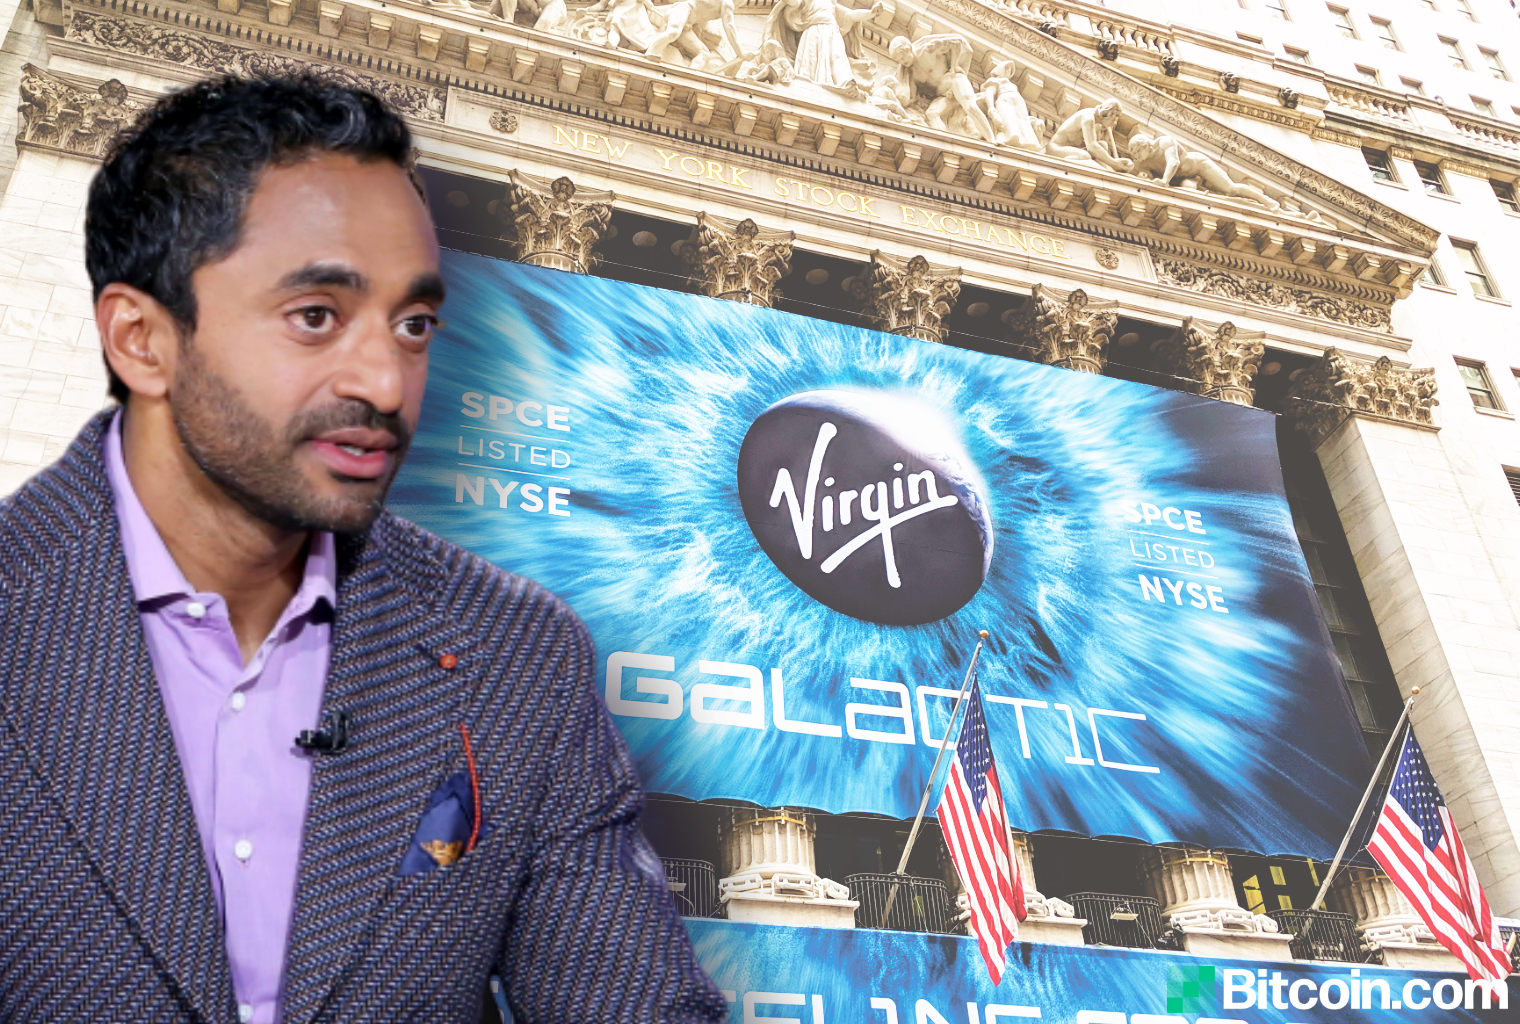 Virgin Galactic's Chamath Palihapitiya: Bitcoin Could Go to $1 Million, Everybody Should Own Some